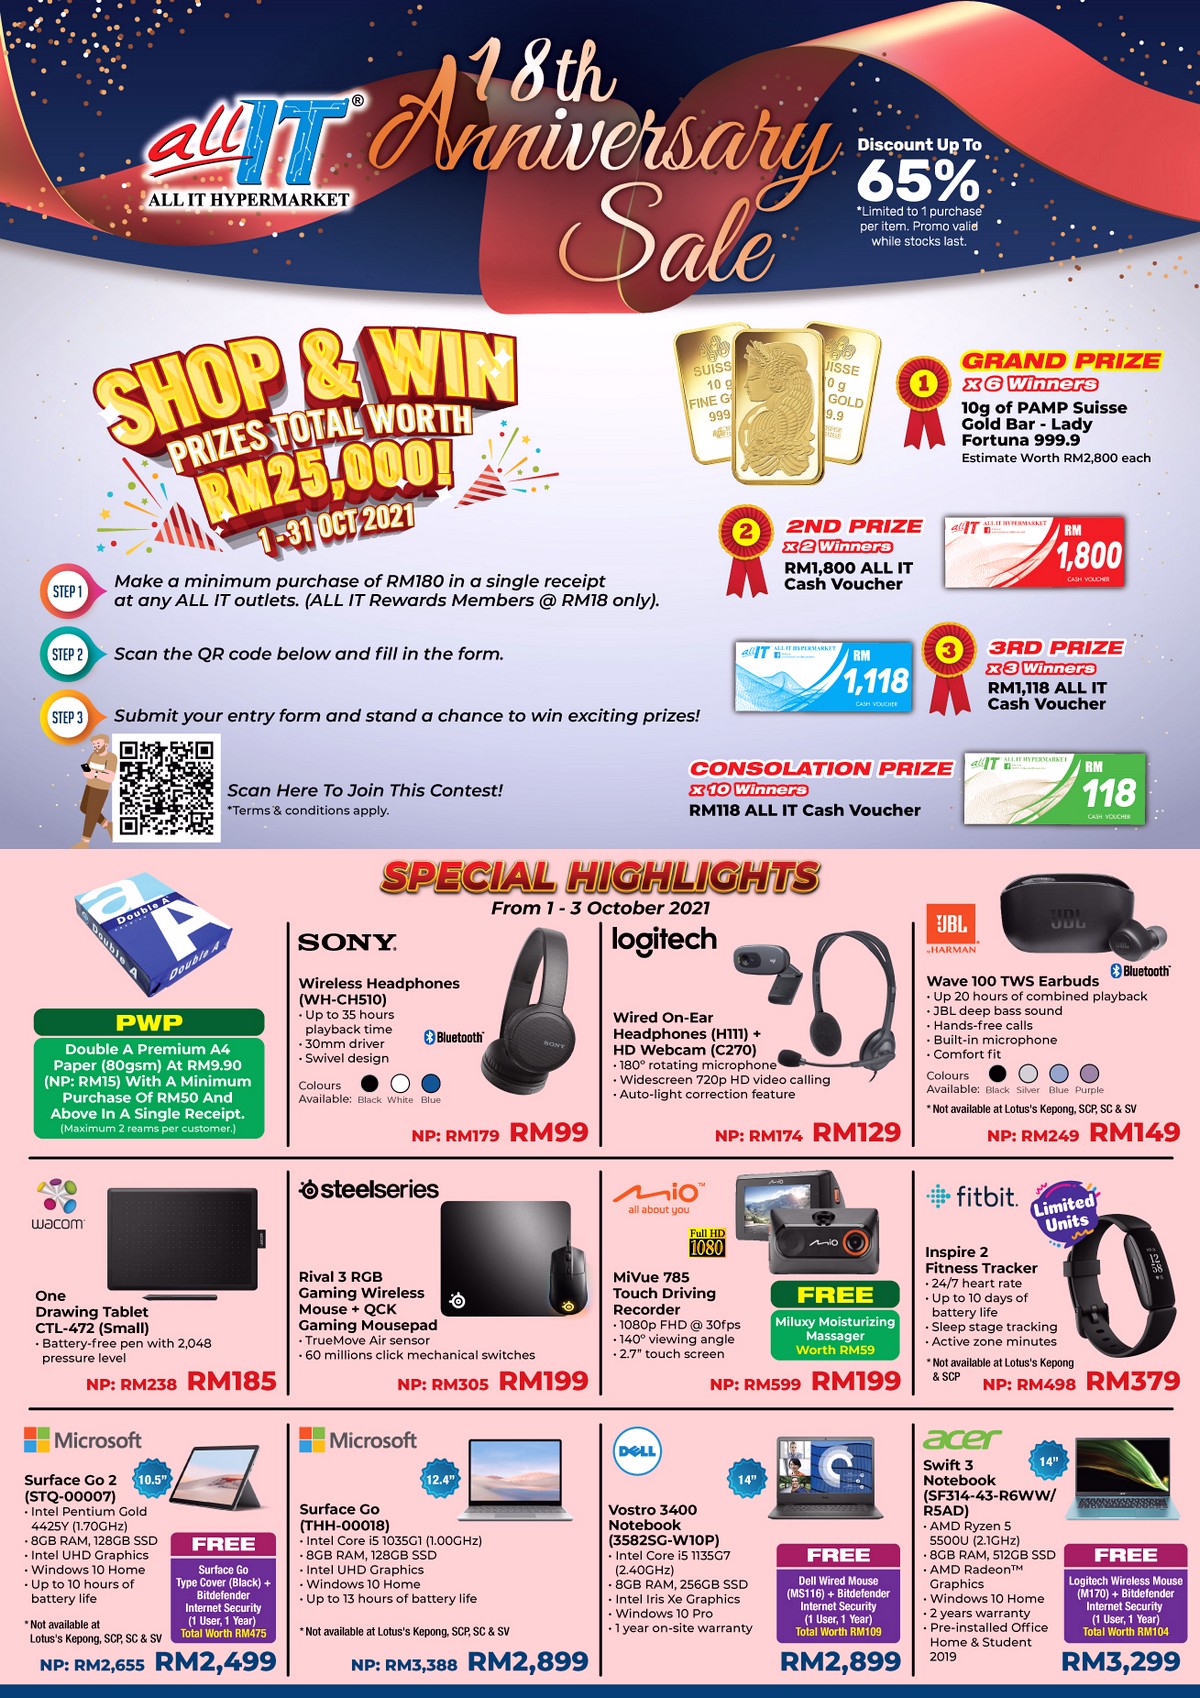 18-Anniversary-Sale1-2 - Audio System & Visual System Cameras Computer Accessories Electronics & Computers Home Appliances IT Gadgets Accessories Kuala Lumpur Laptop Mobile Phone Putrajaya Selangor Tablets Warehouse Sale & Clearance in Malaysia 